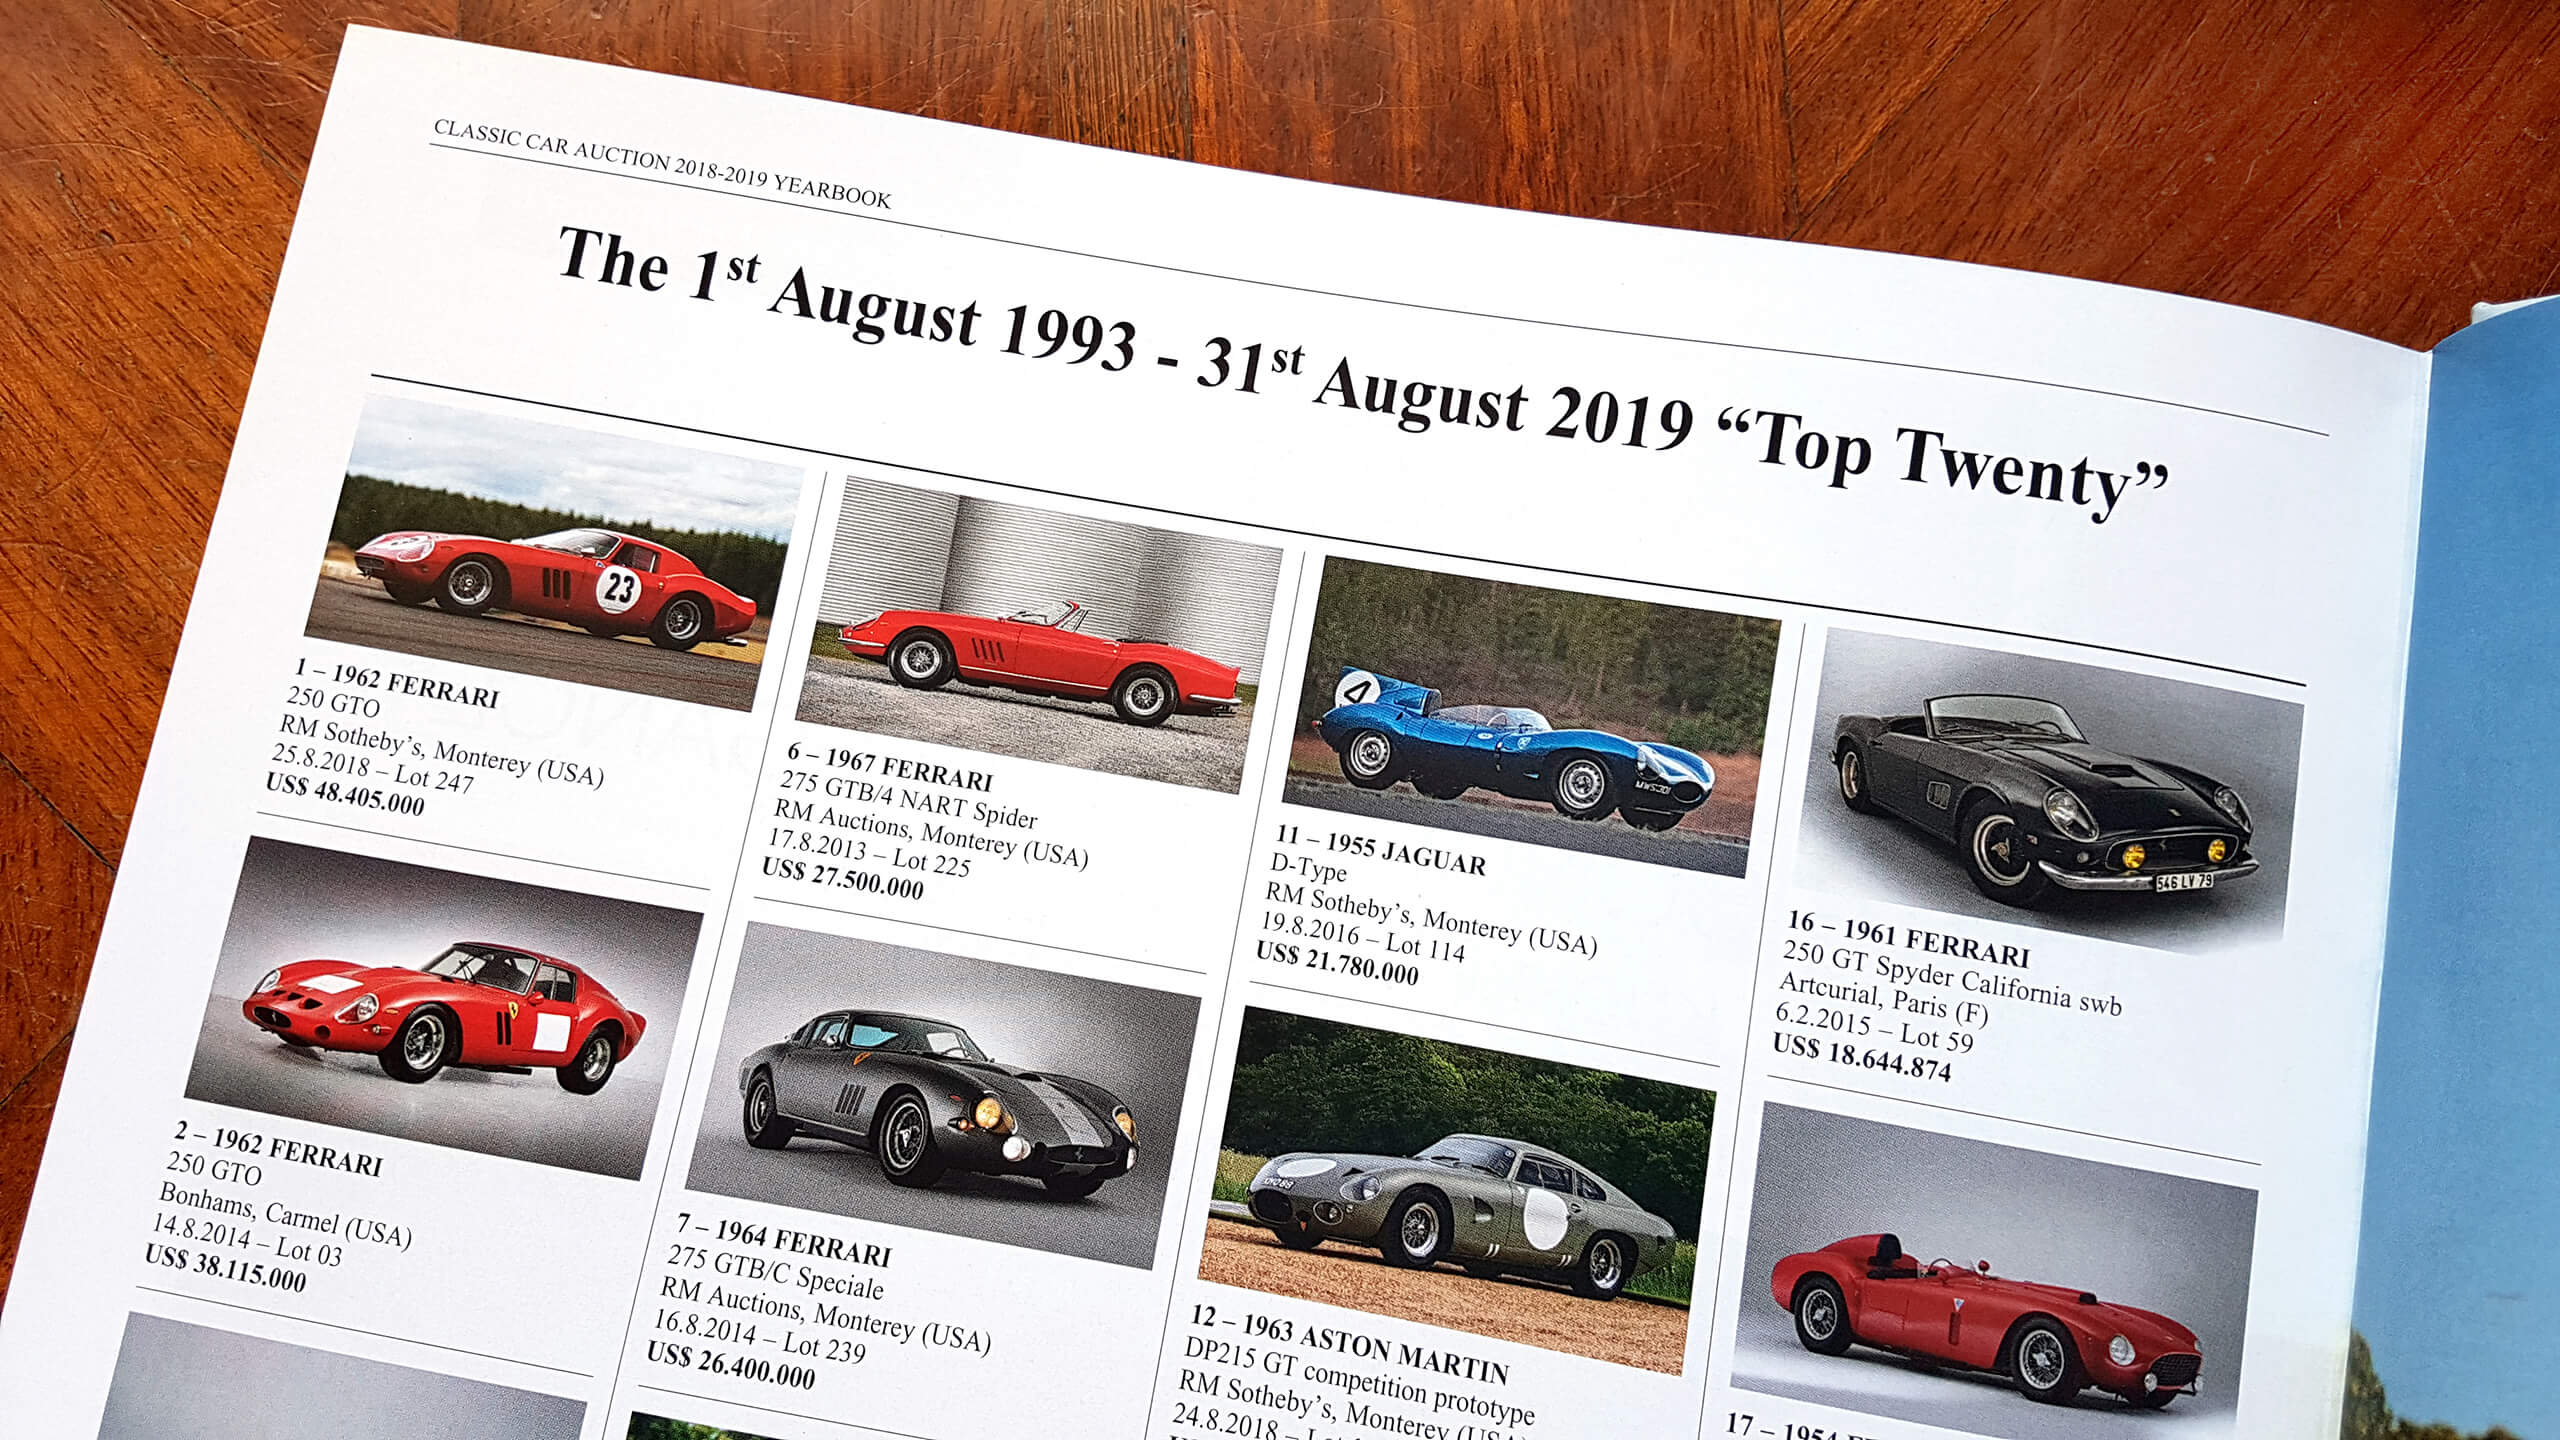 12 months in the making: Classic Car Auction Yearbook 2018-2019